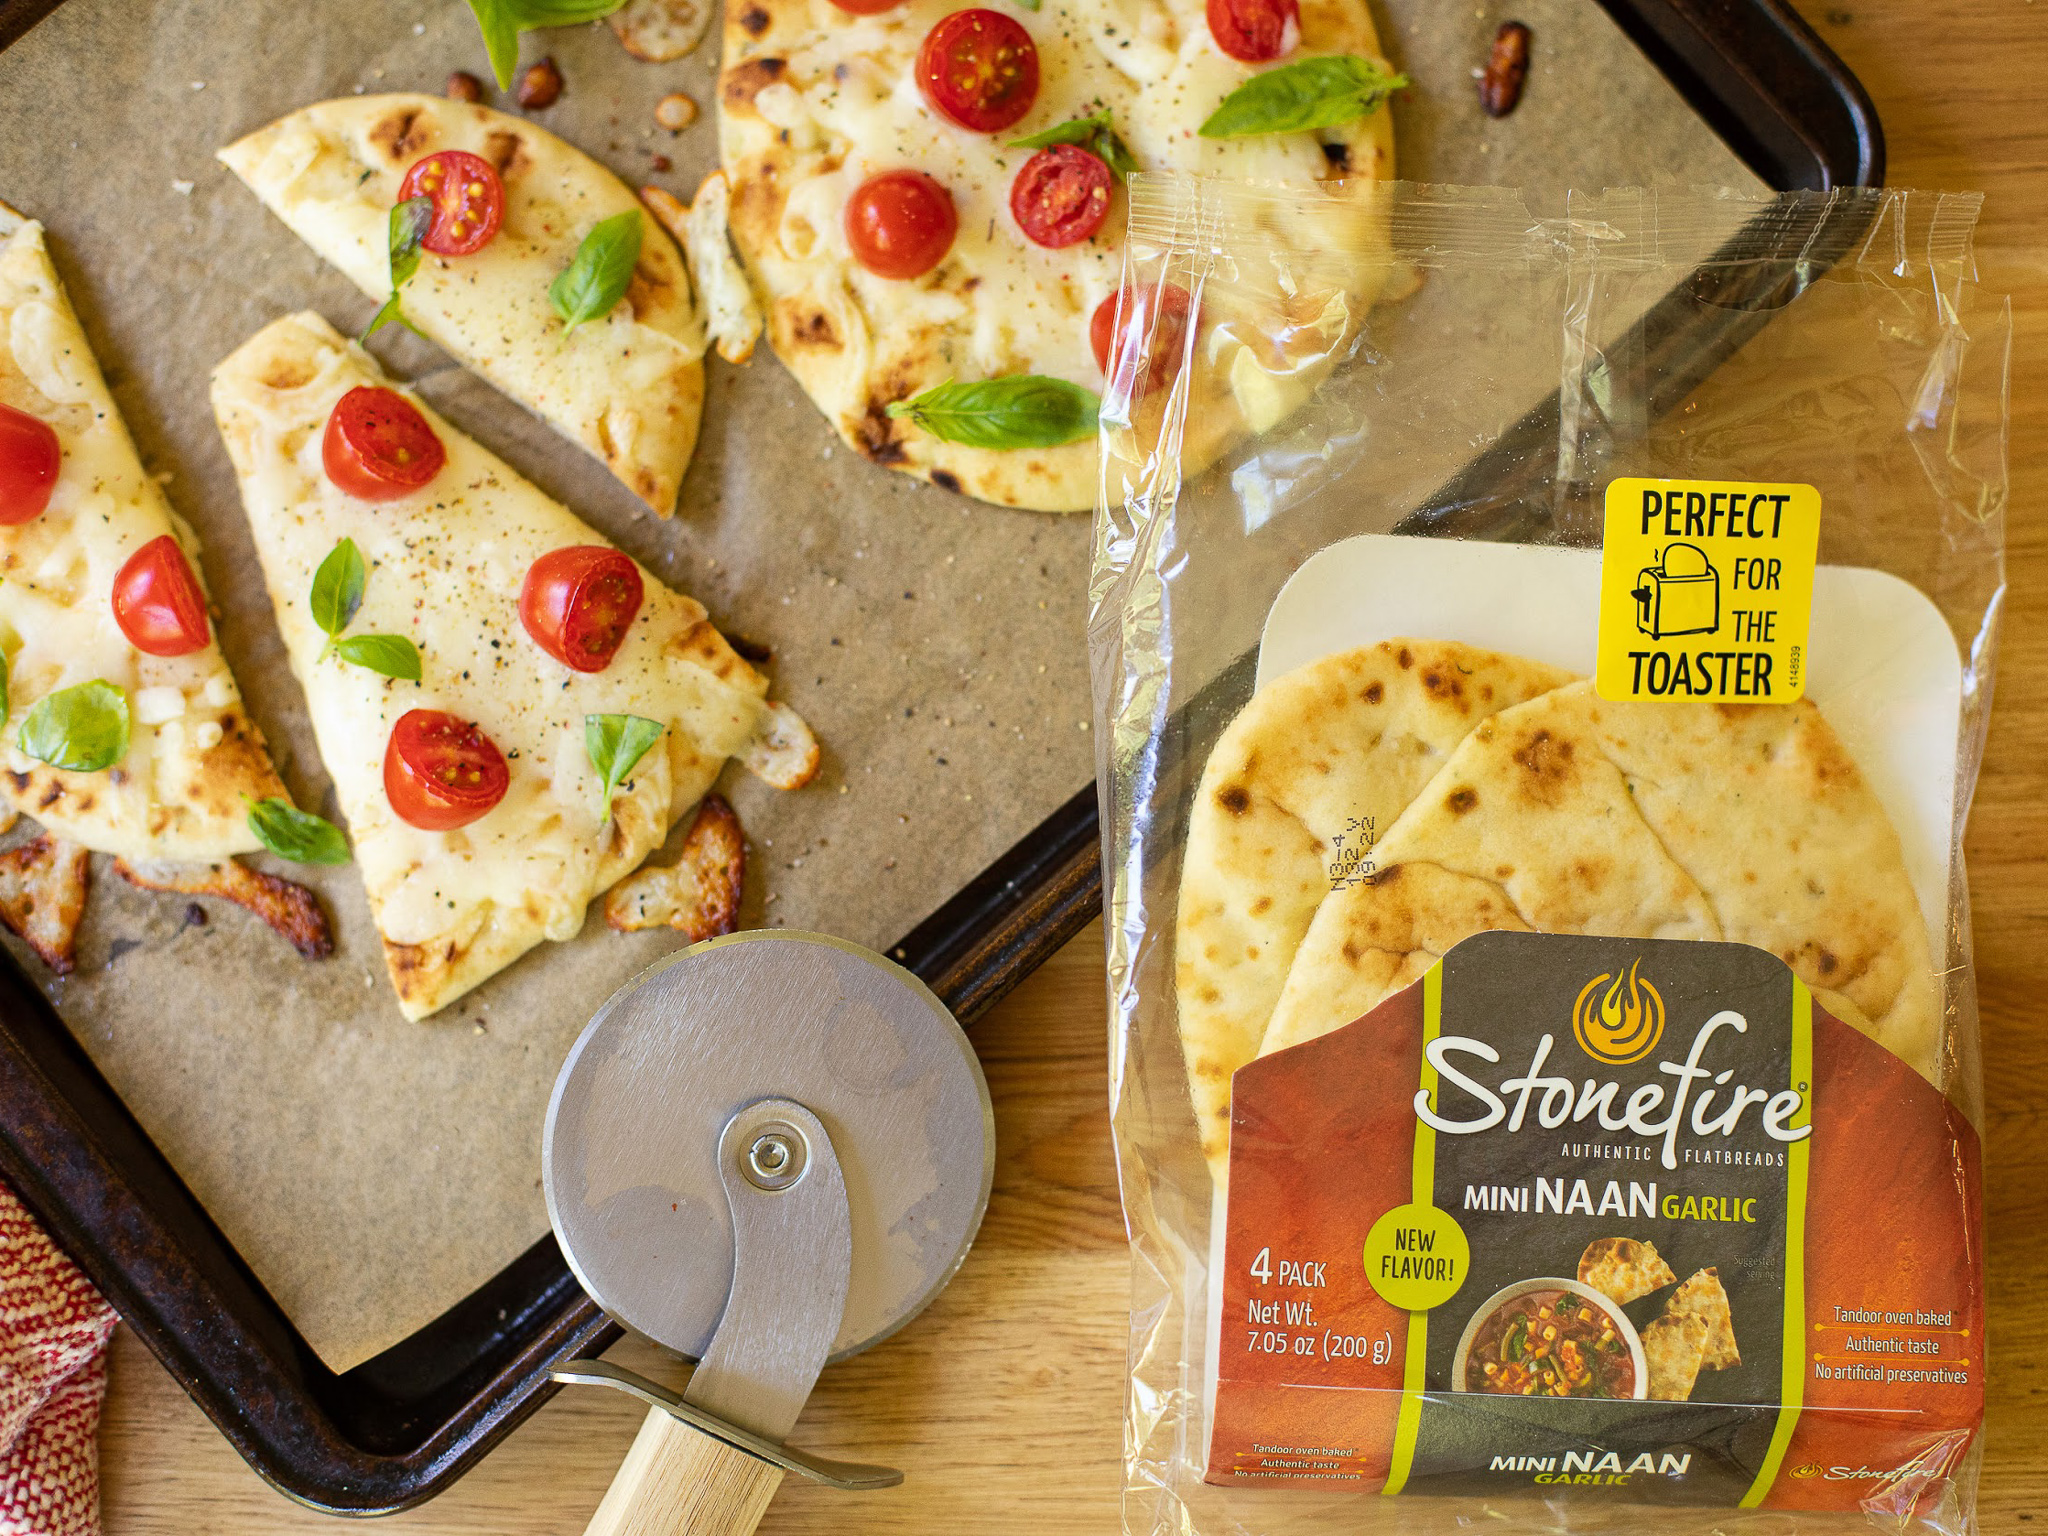 Stonefire Naan Deals At Publix – As Low As 90¢ At Publix